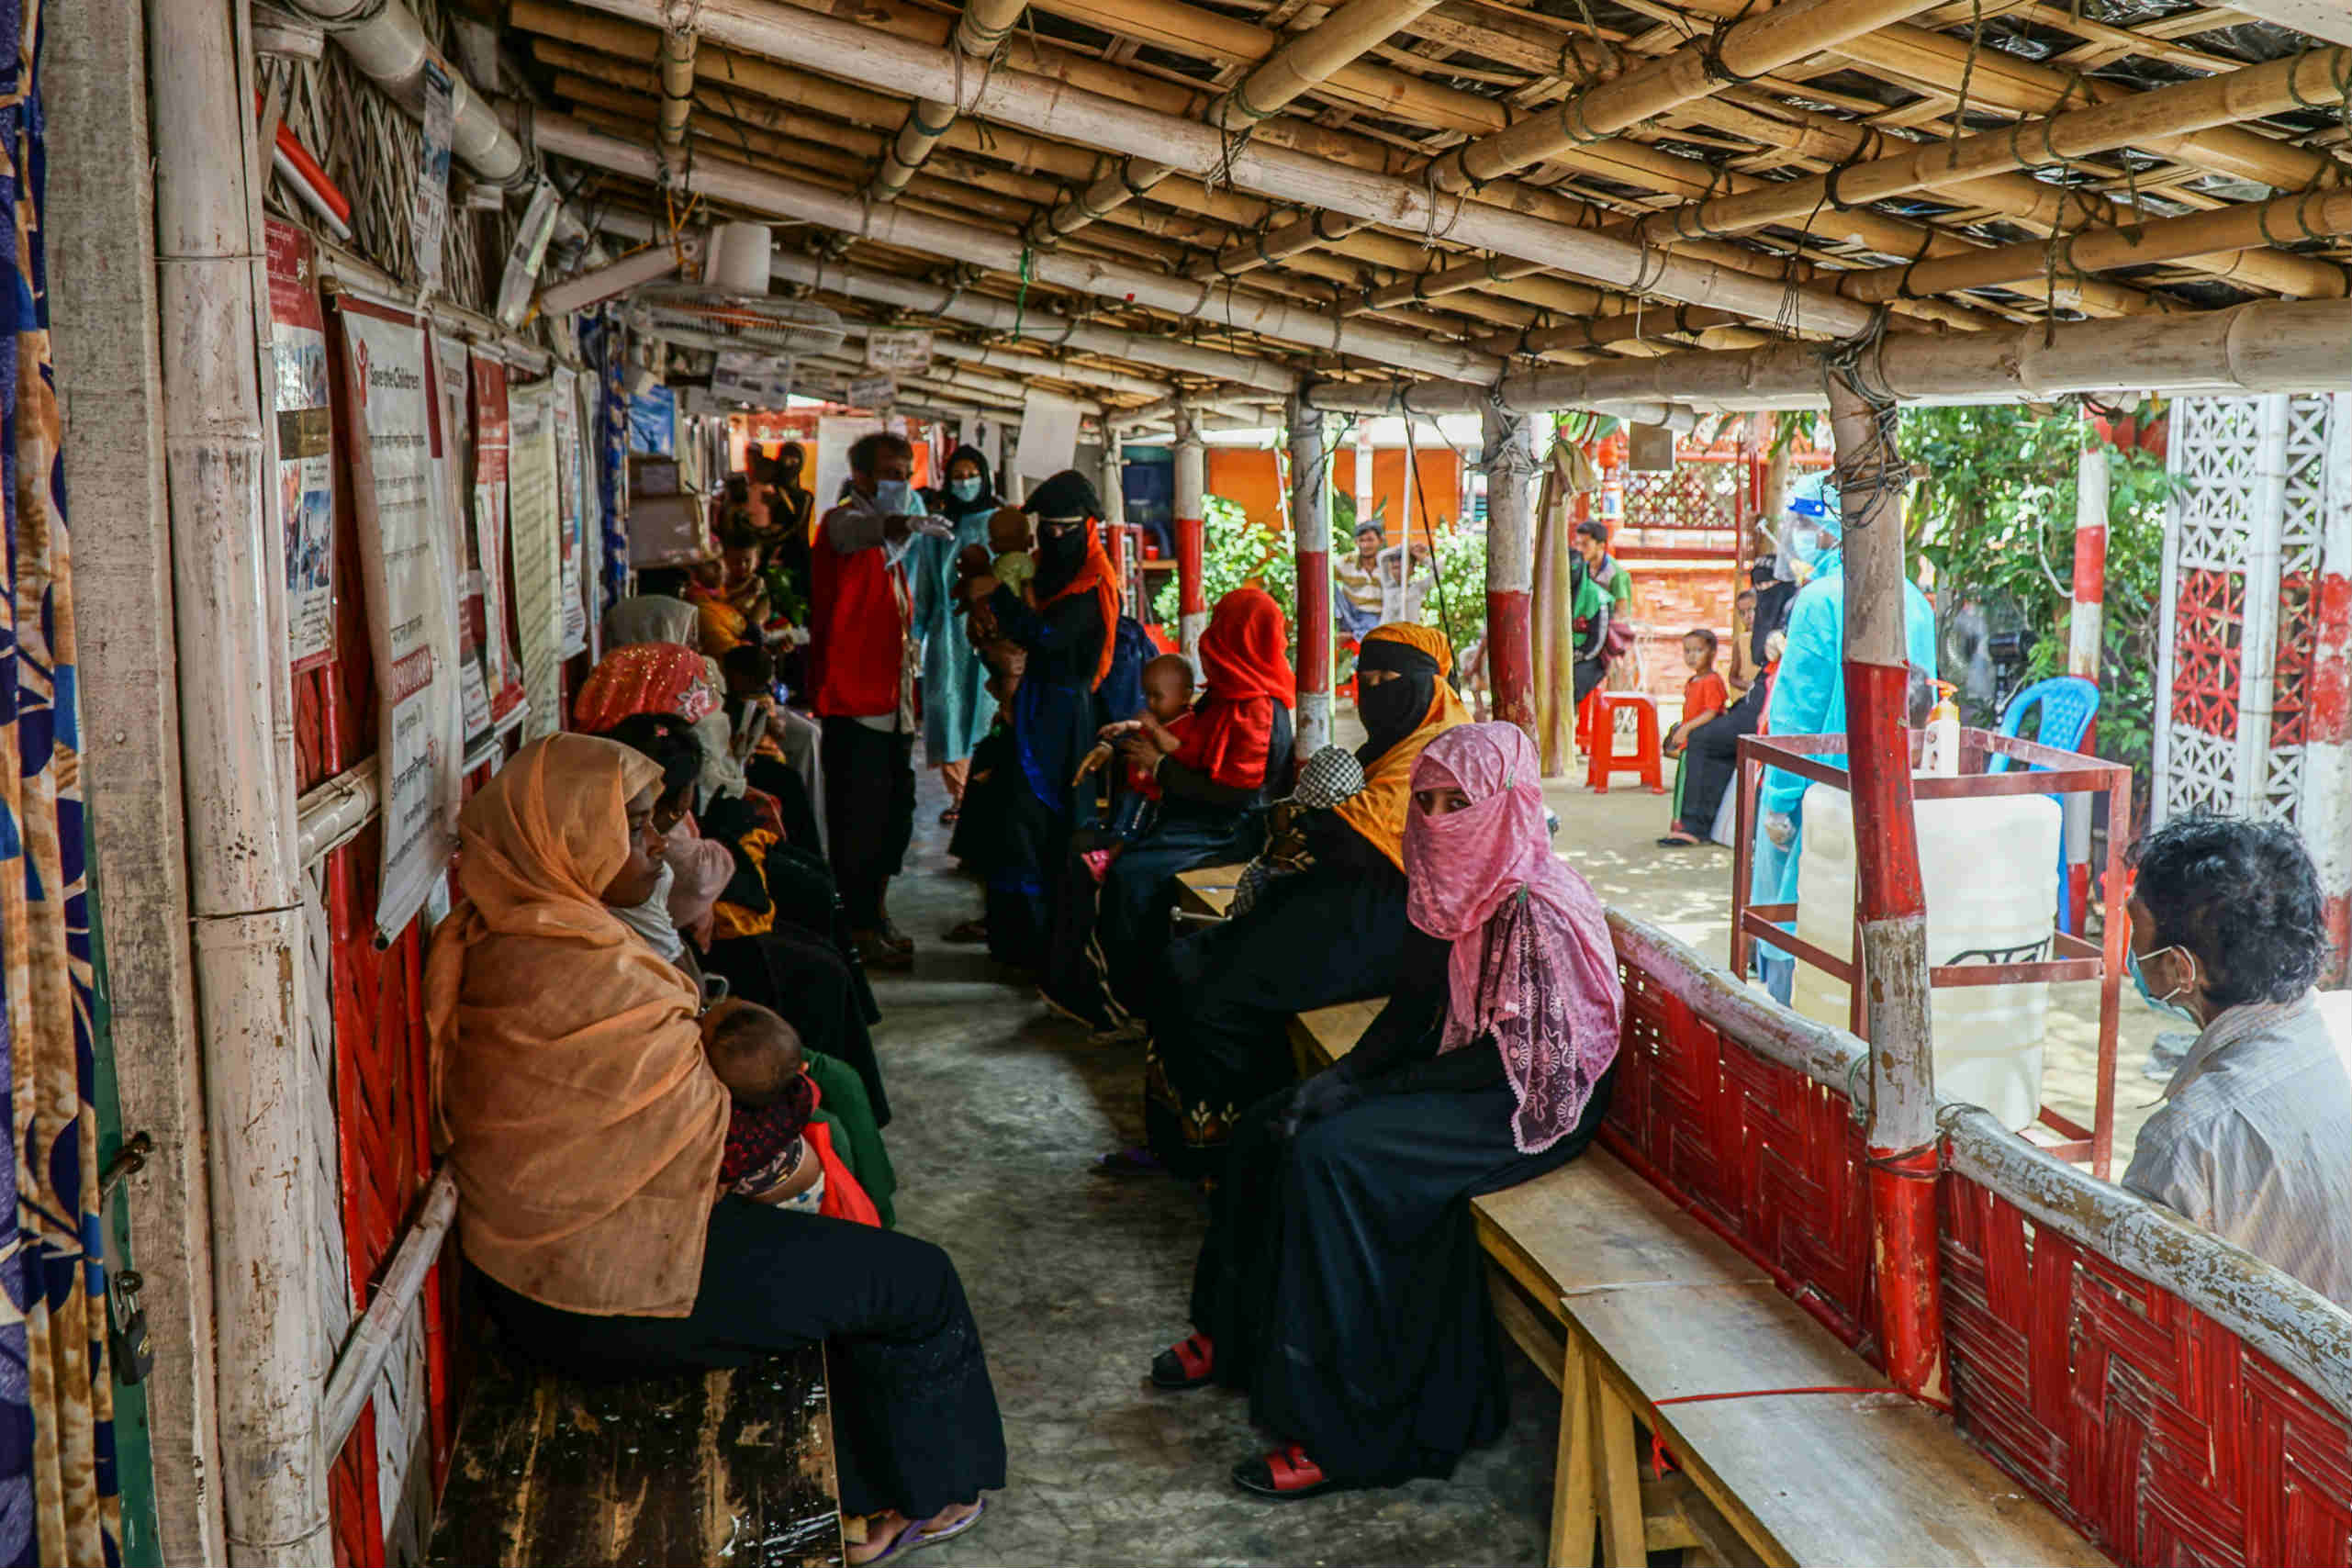 Save the Children has almost 100 frontline healthcare workers providing services to the Rohingya refugee and host communities in Cox's Bazar, Bangladesh